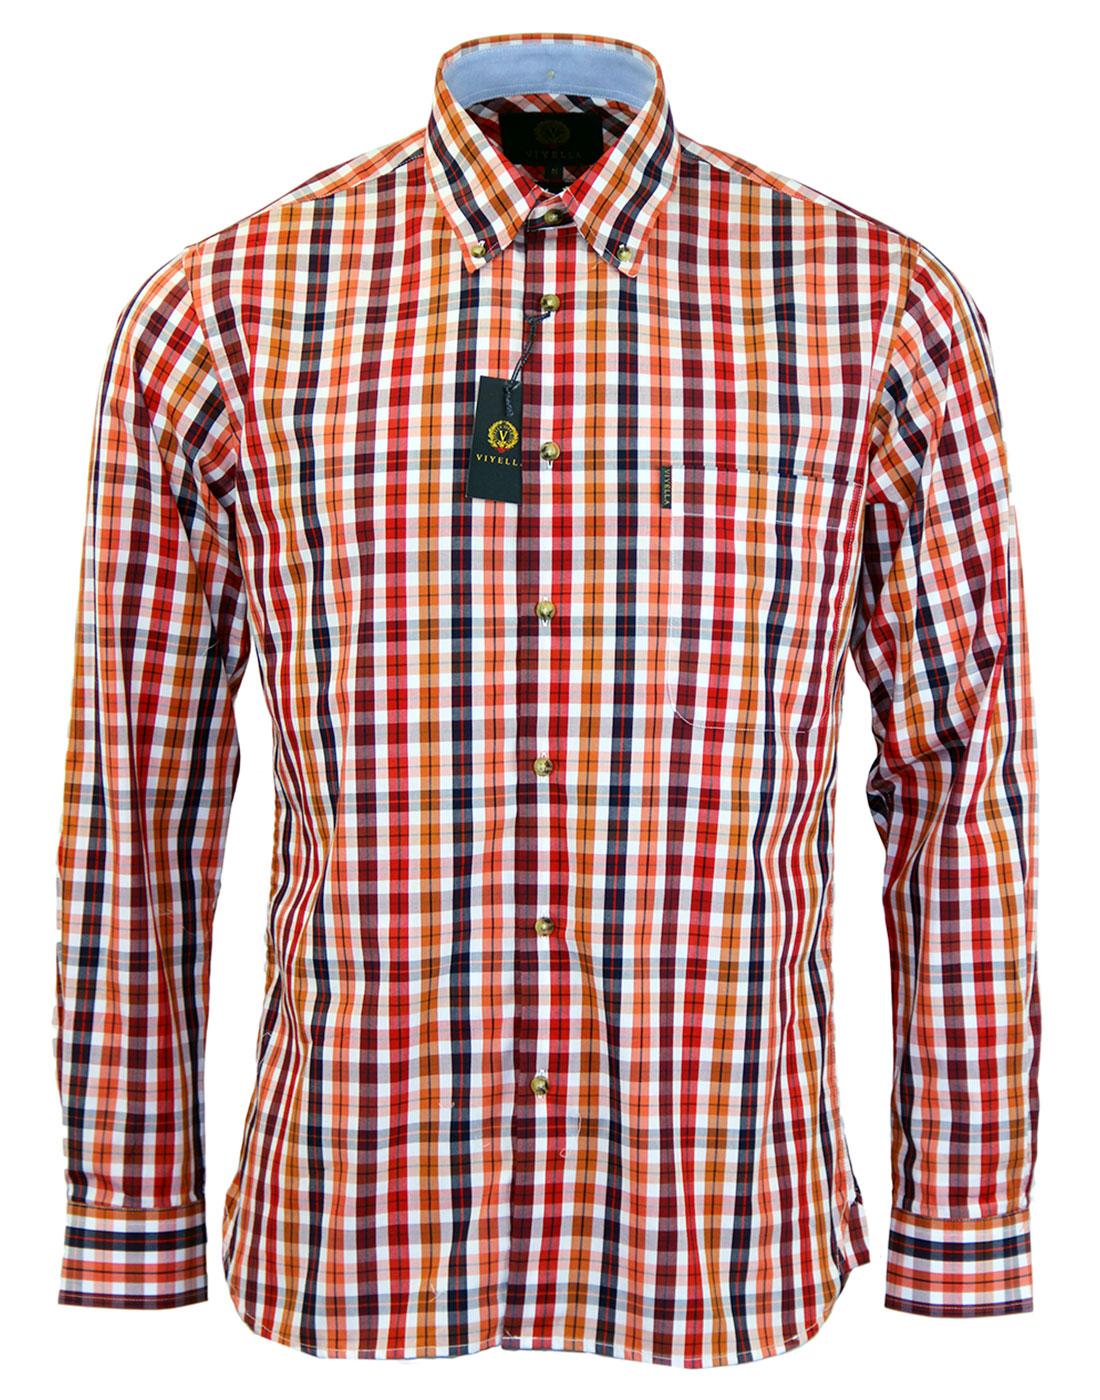 west point red button down shirt